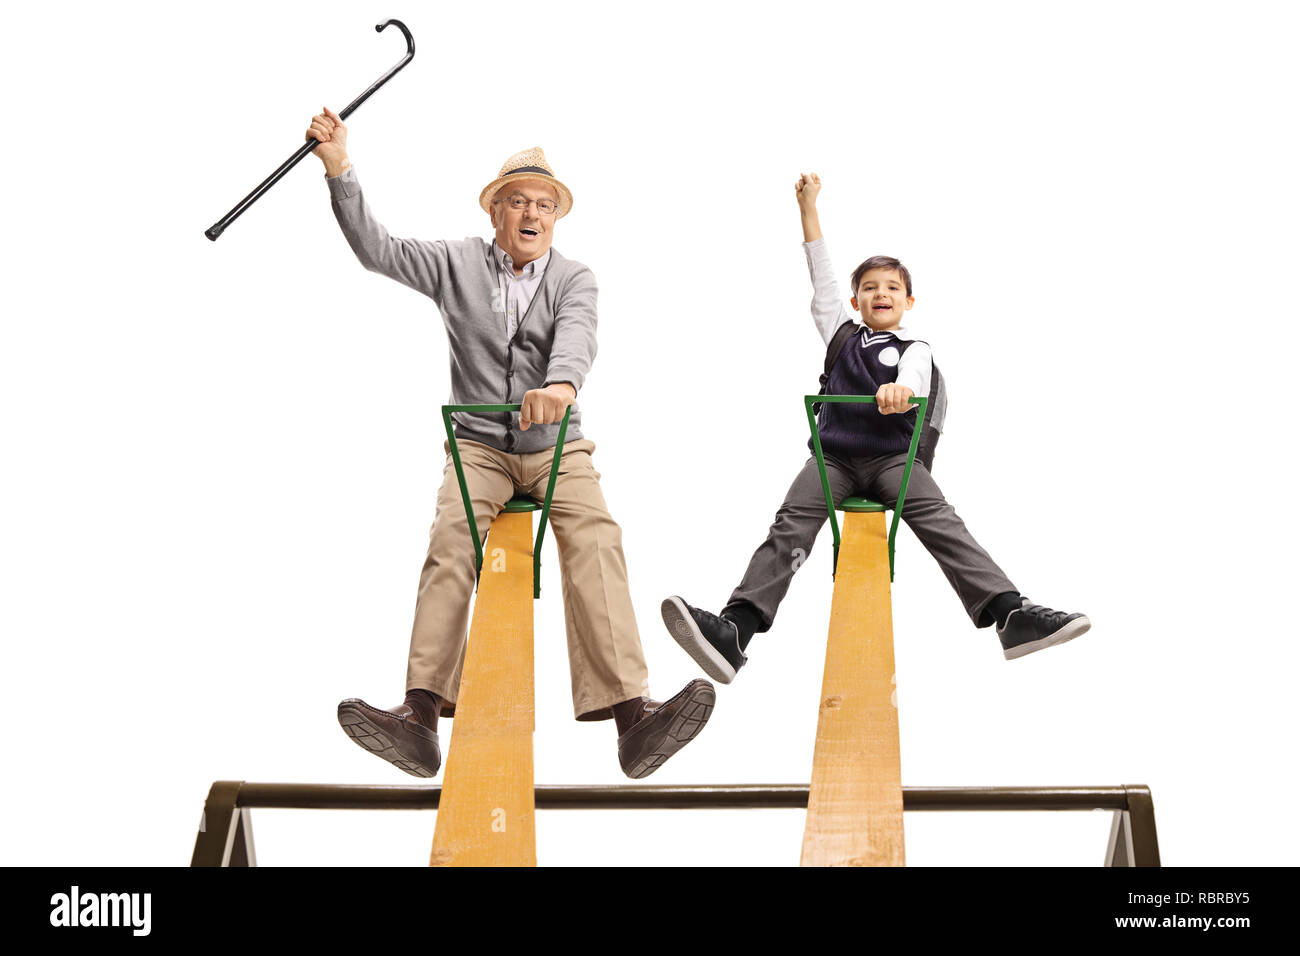 Cheerful grandpa and his grandson having fun on a seesaw isolated on white background Stock Photo